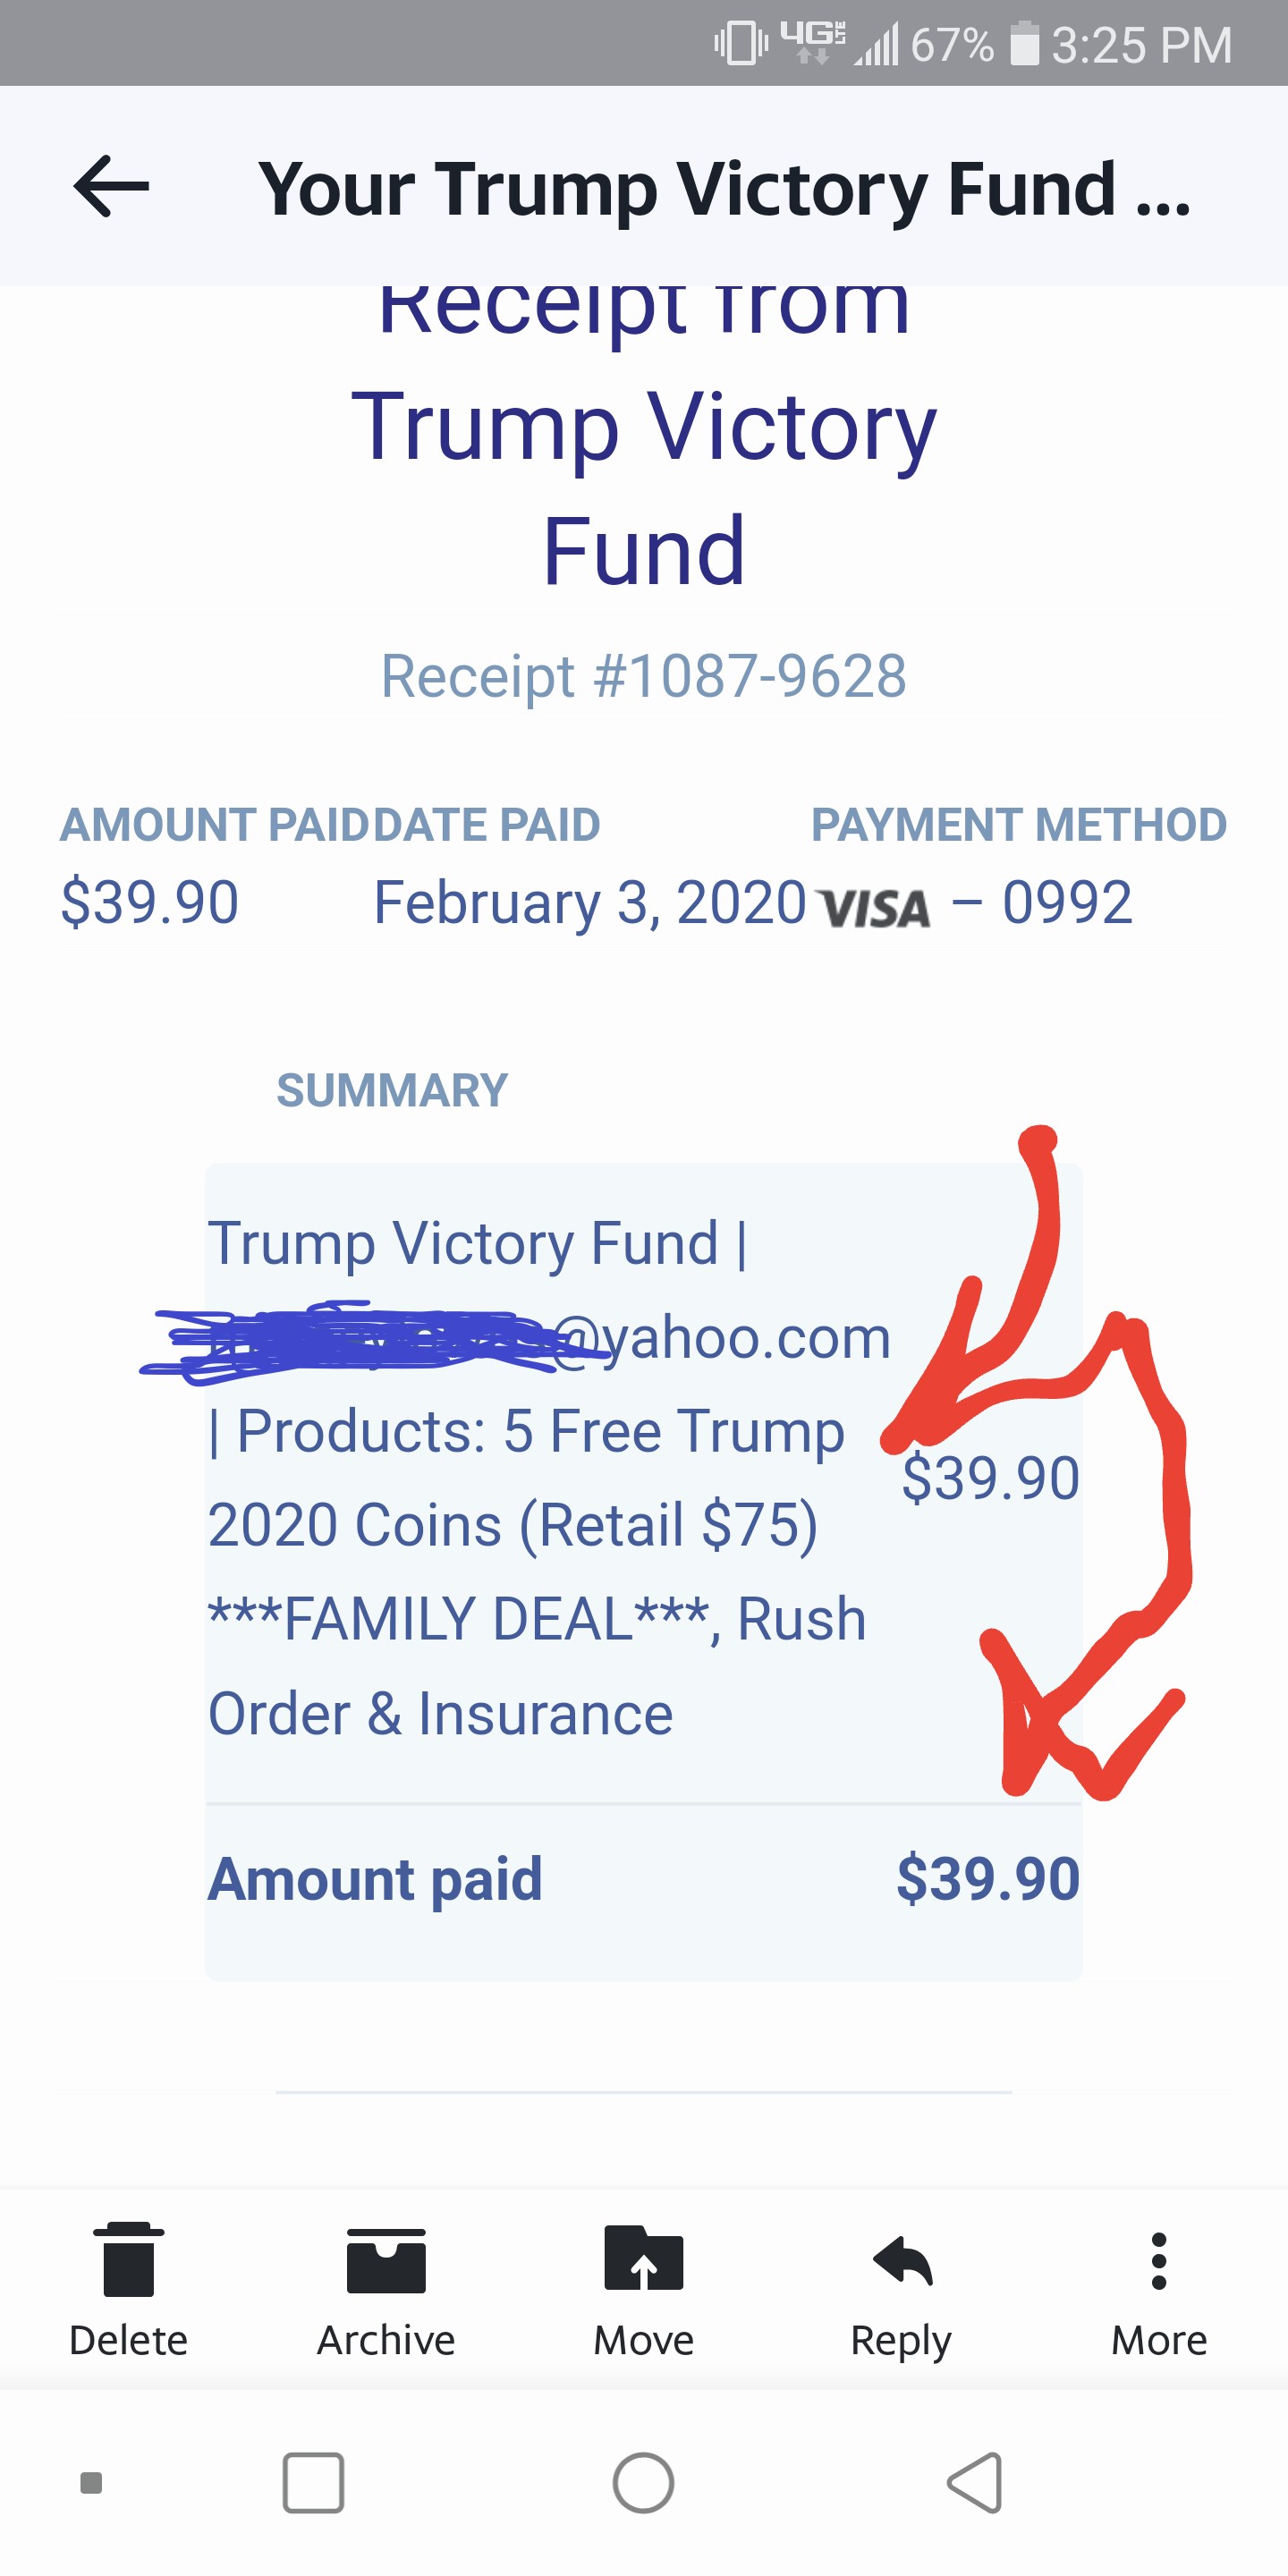 Receipt From Trump Victory Fund